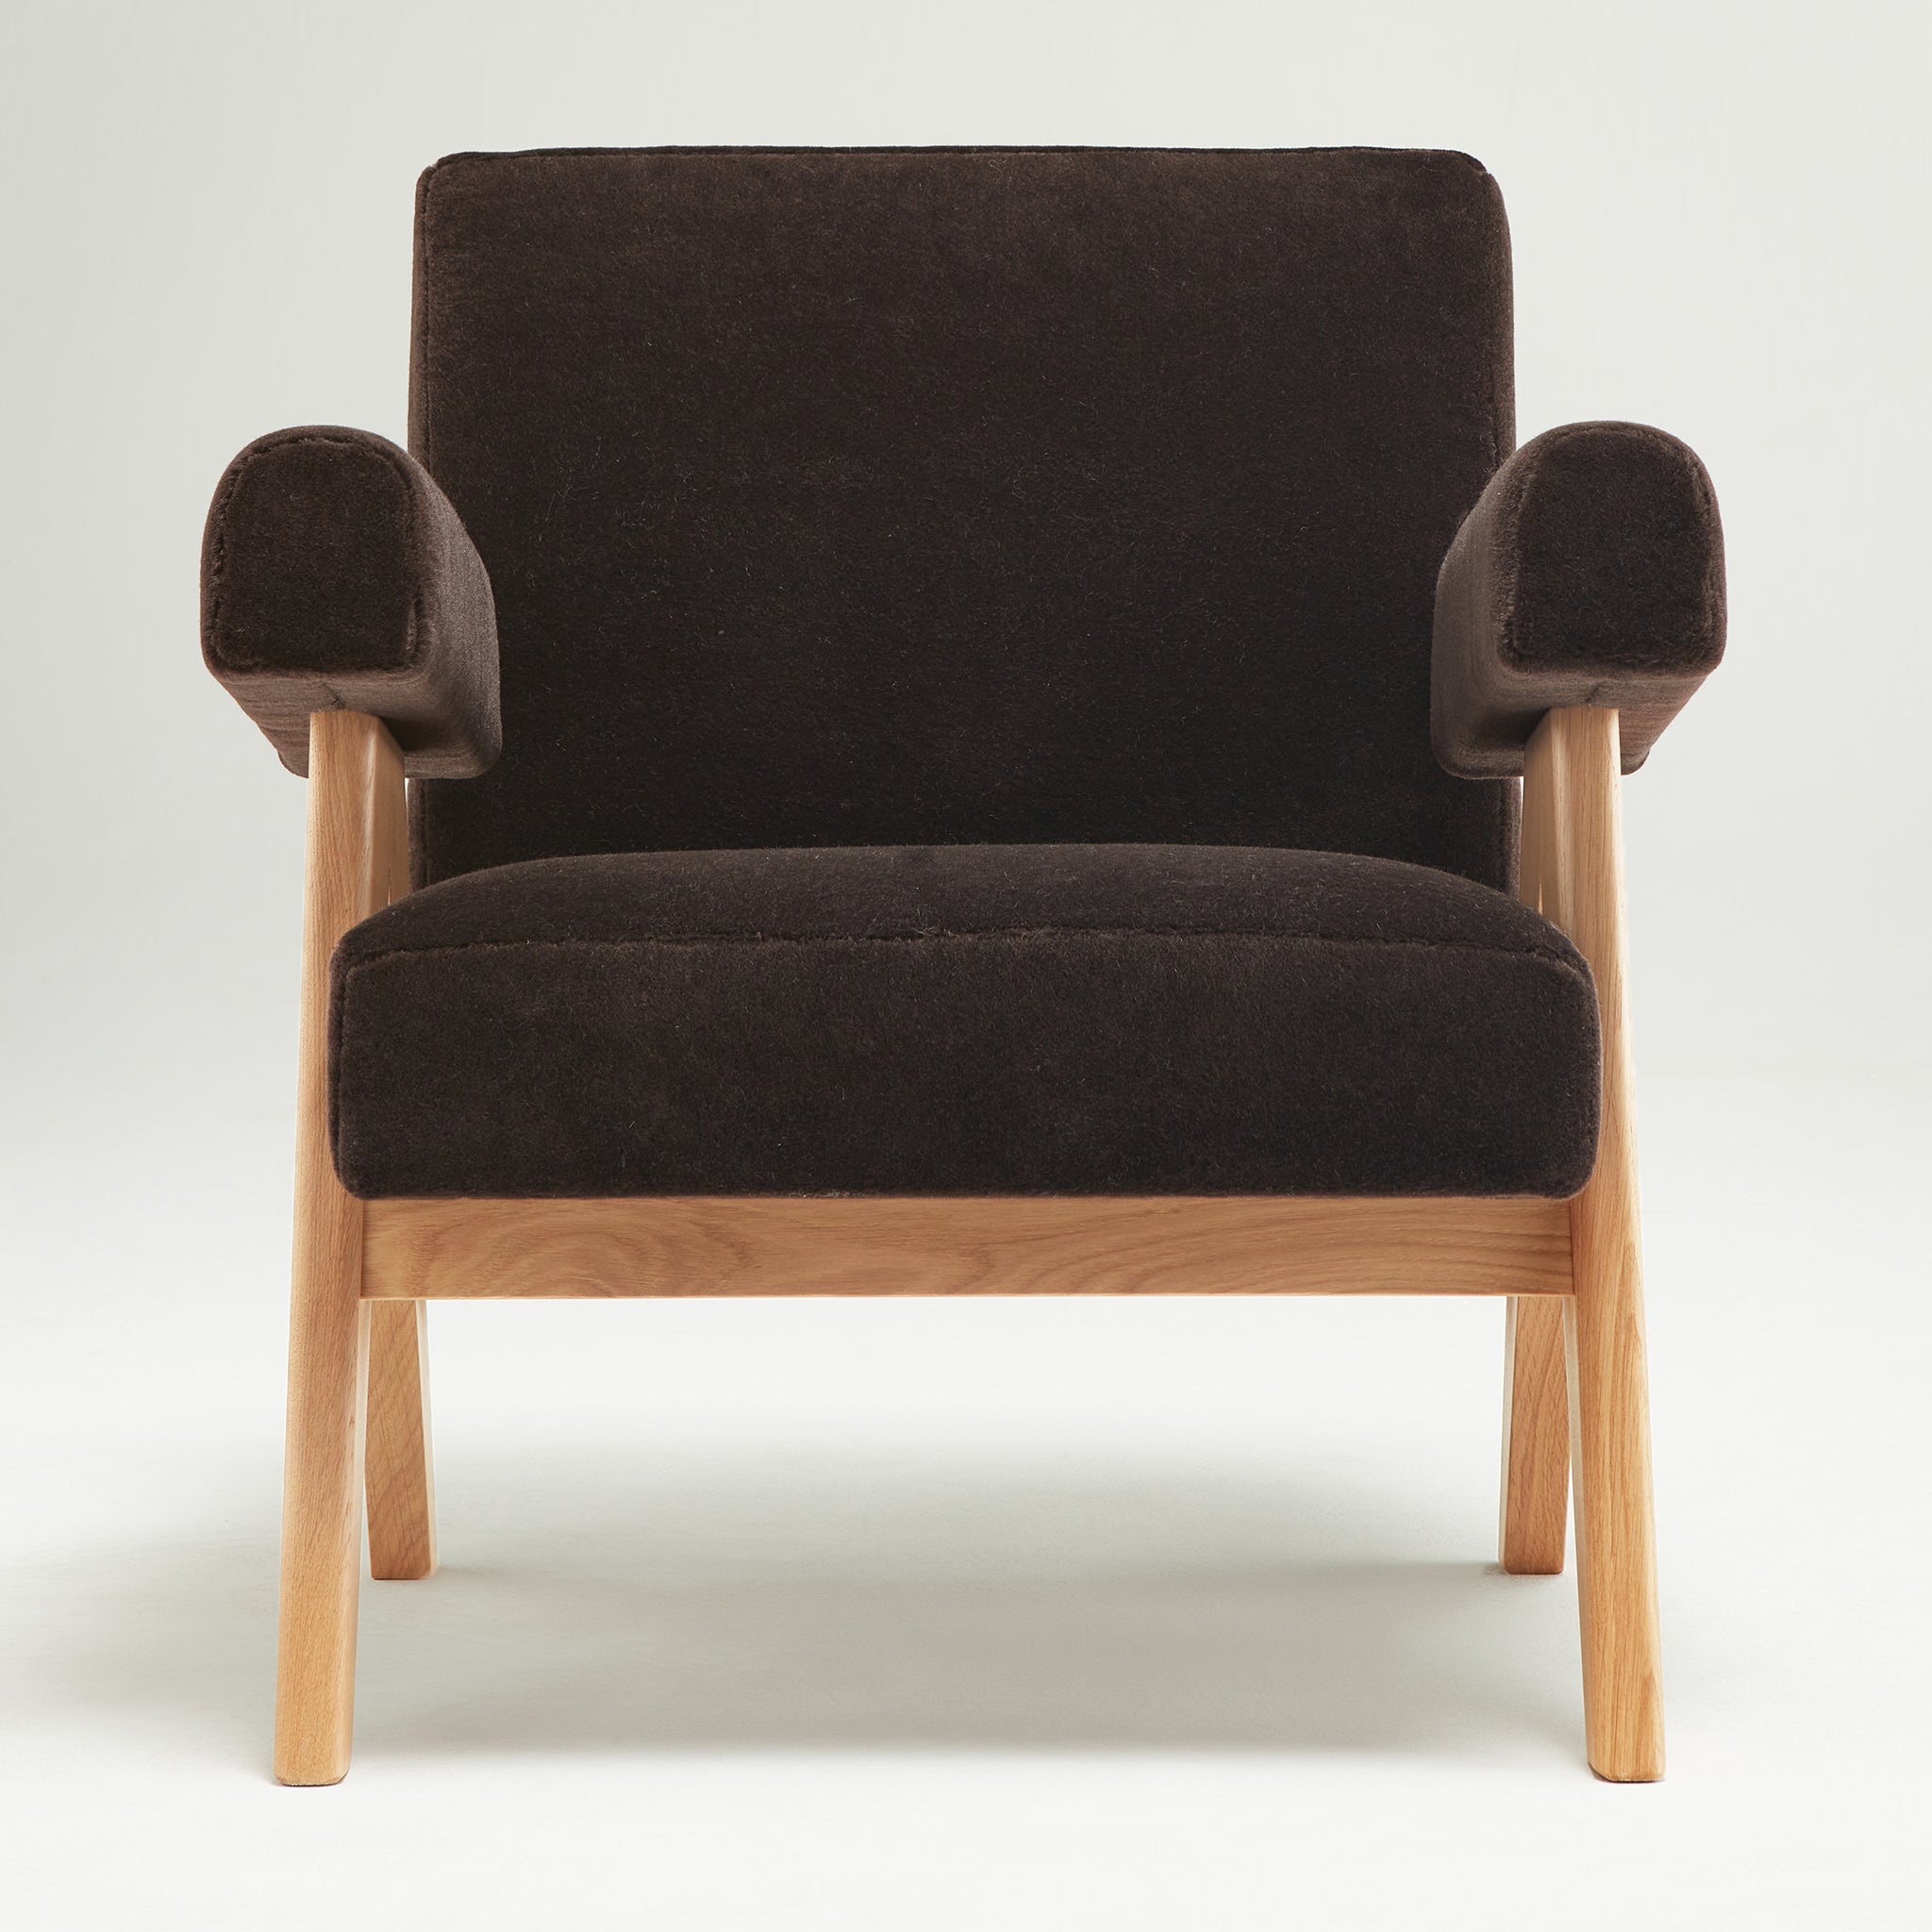 Front view of an authentic chandigarh lounge chair, pierre jeanneret era, natural oak frame, pierre frey choco teddy mohair upholstery, by Klarel #K35-31